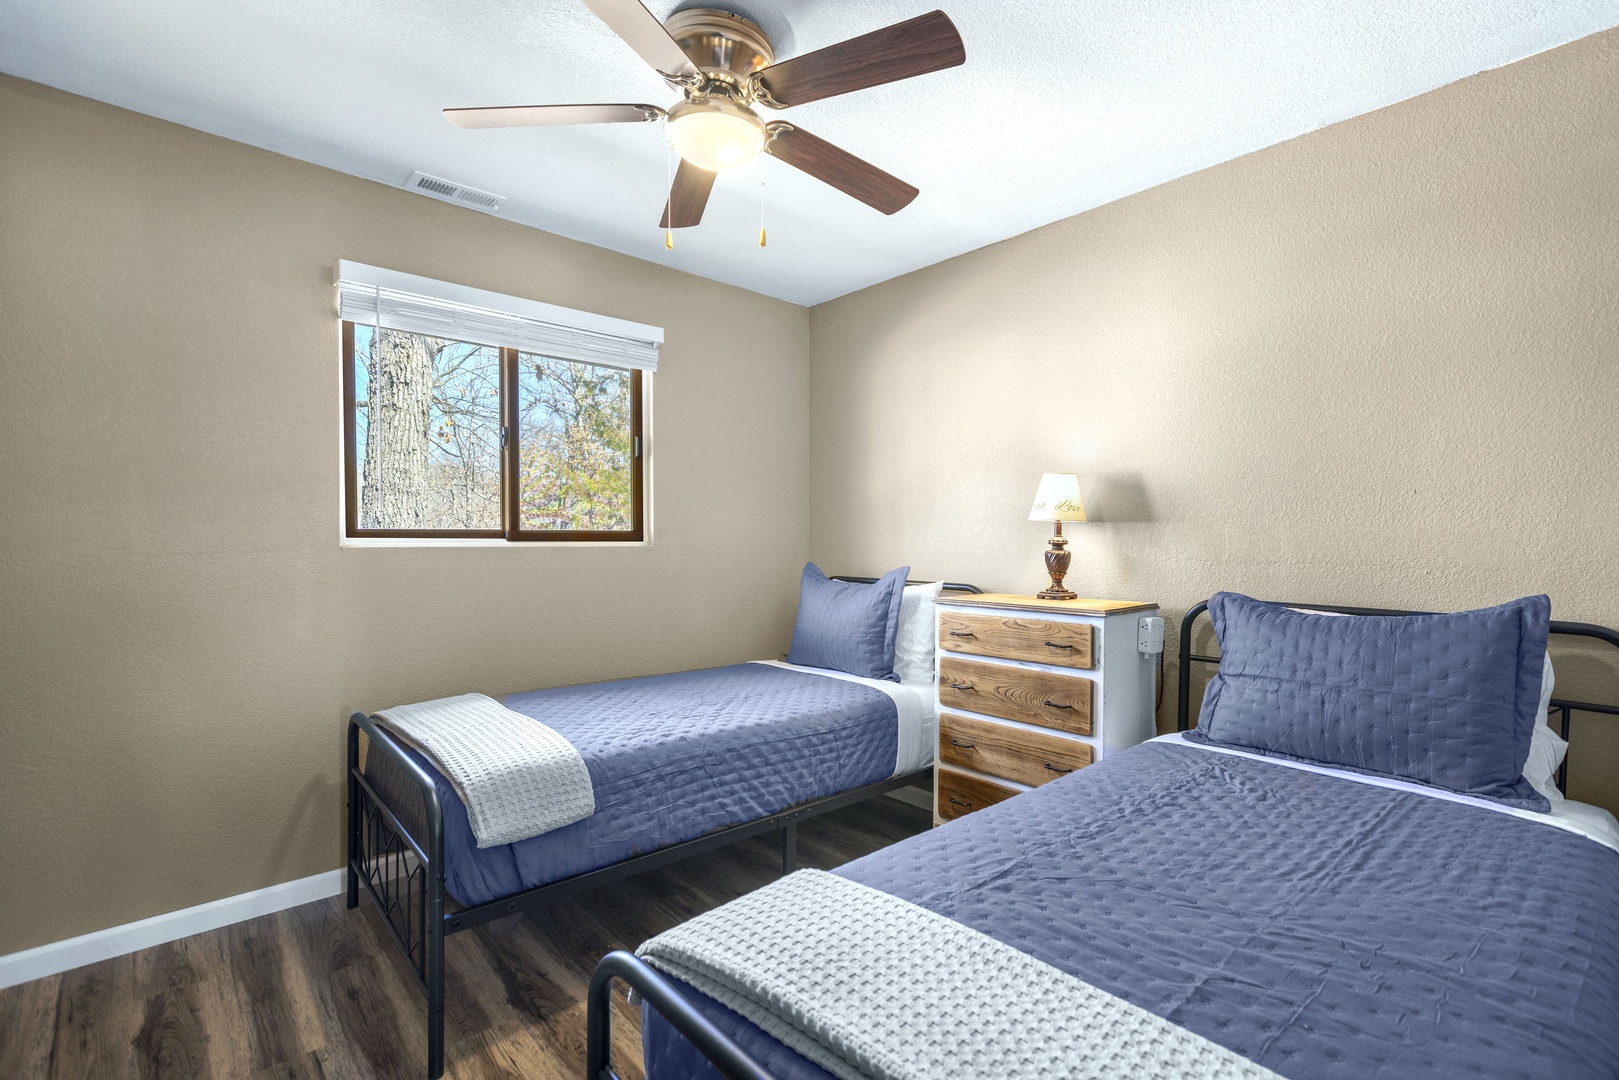 This cozy bedroom offers a pair of twin beds & ceiling fan